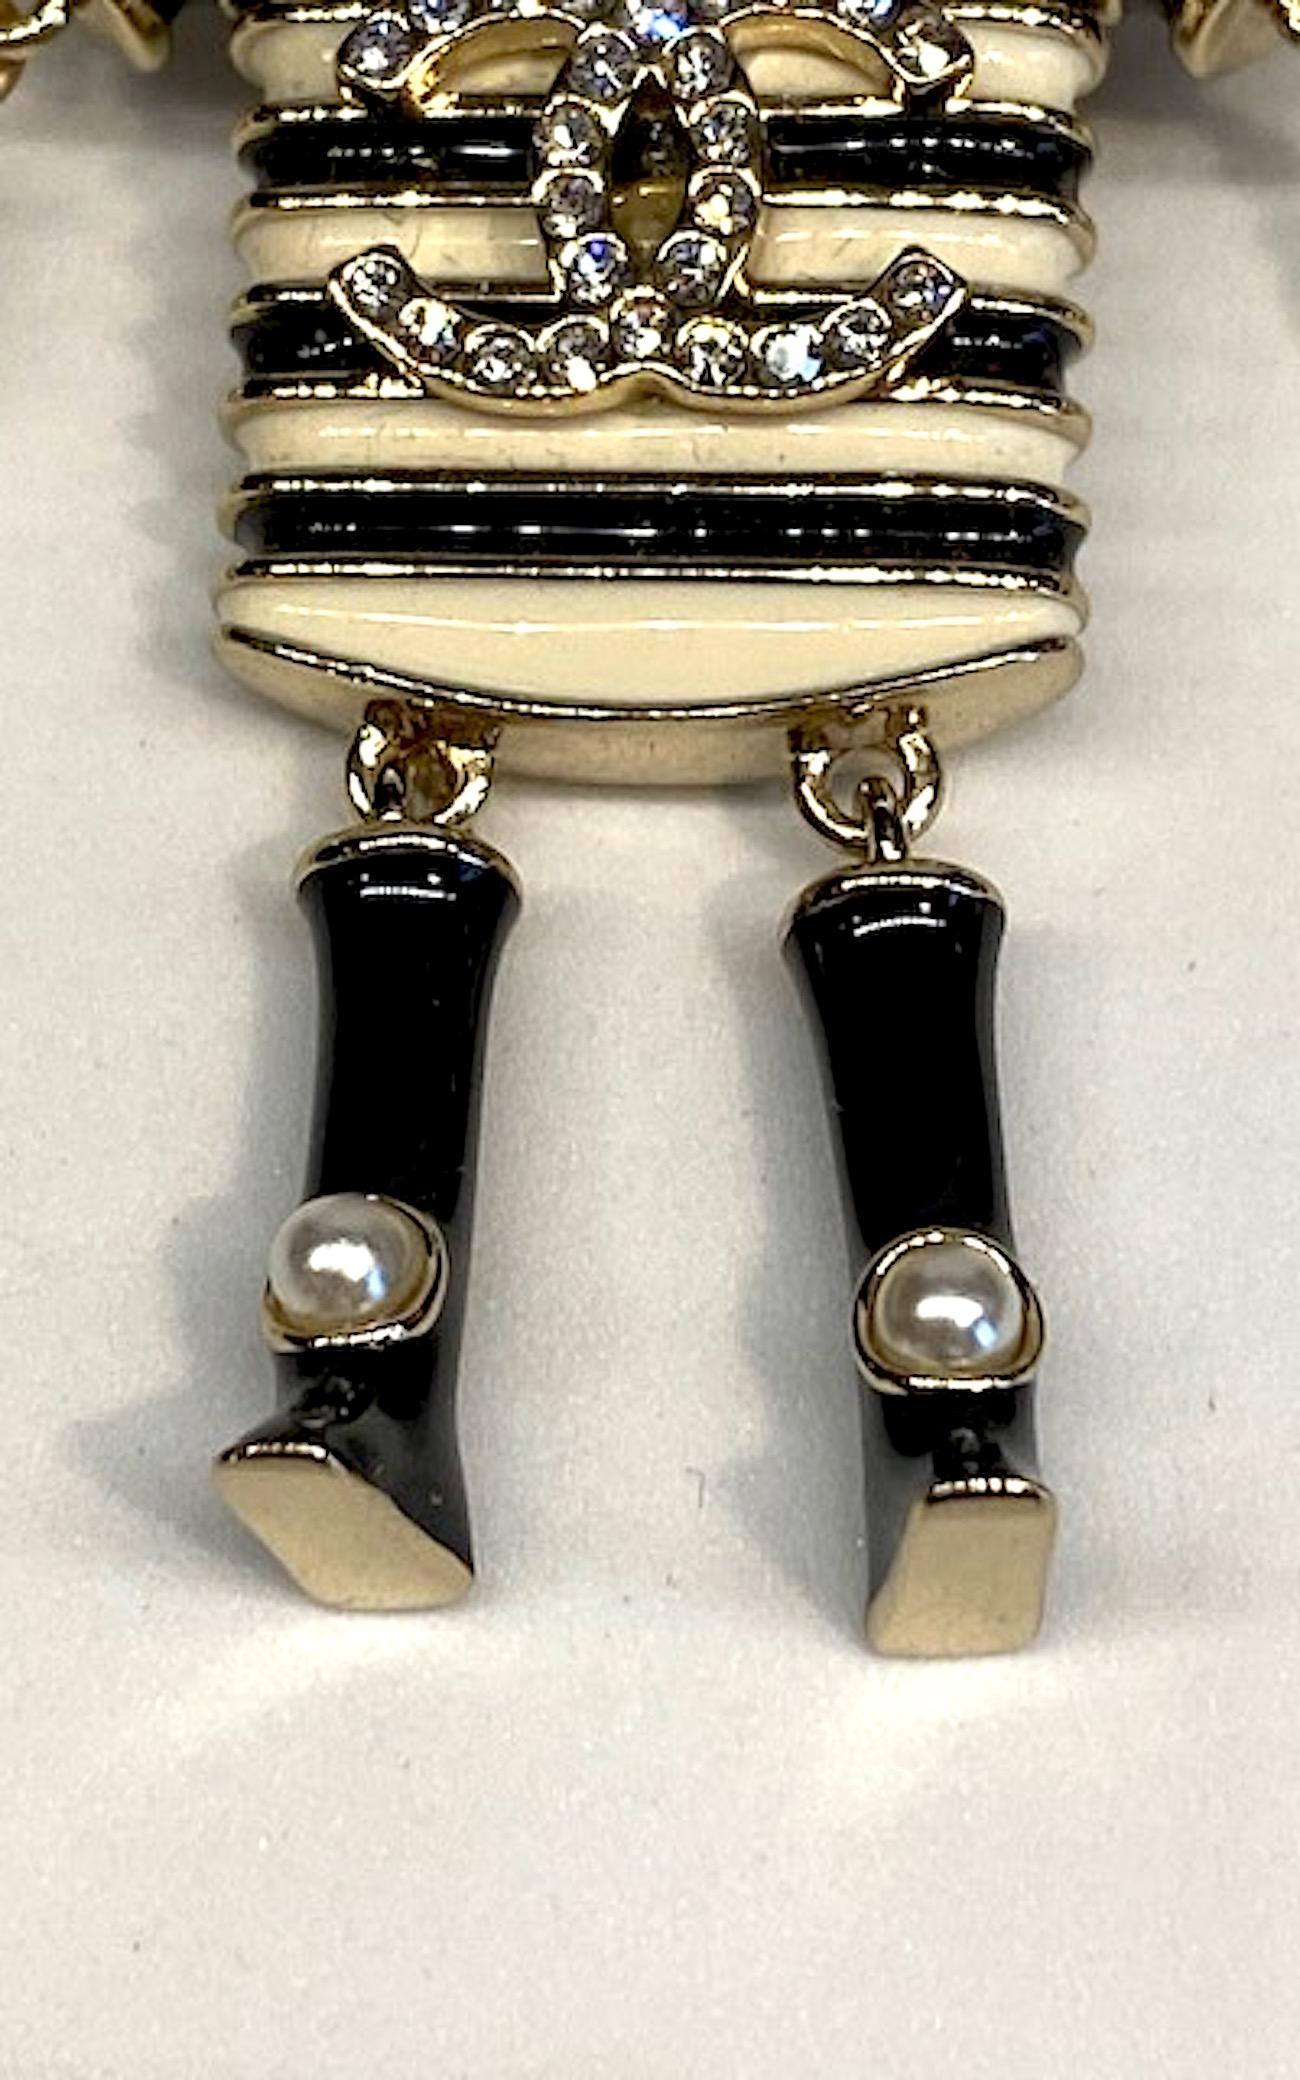 Chanel Nautical Figural Enamel Brooch, Autumn 2019 Collection 2